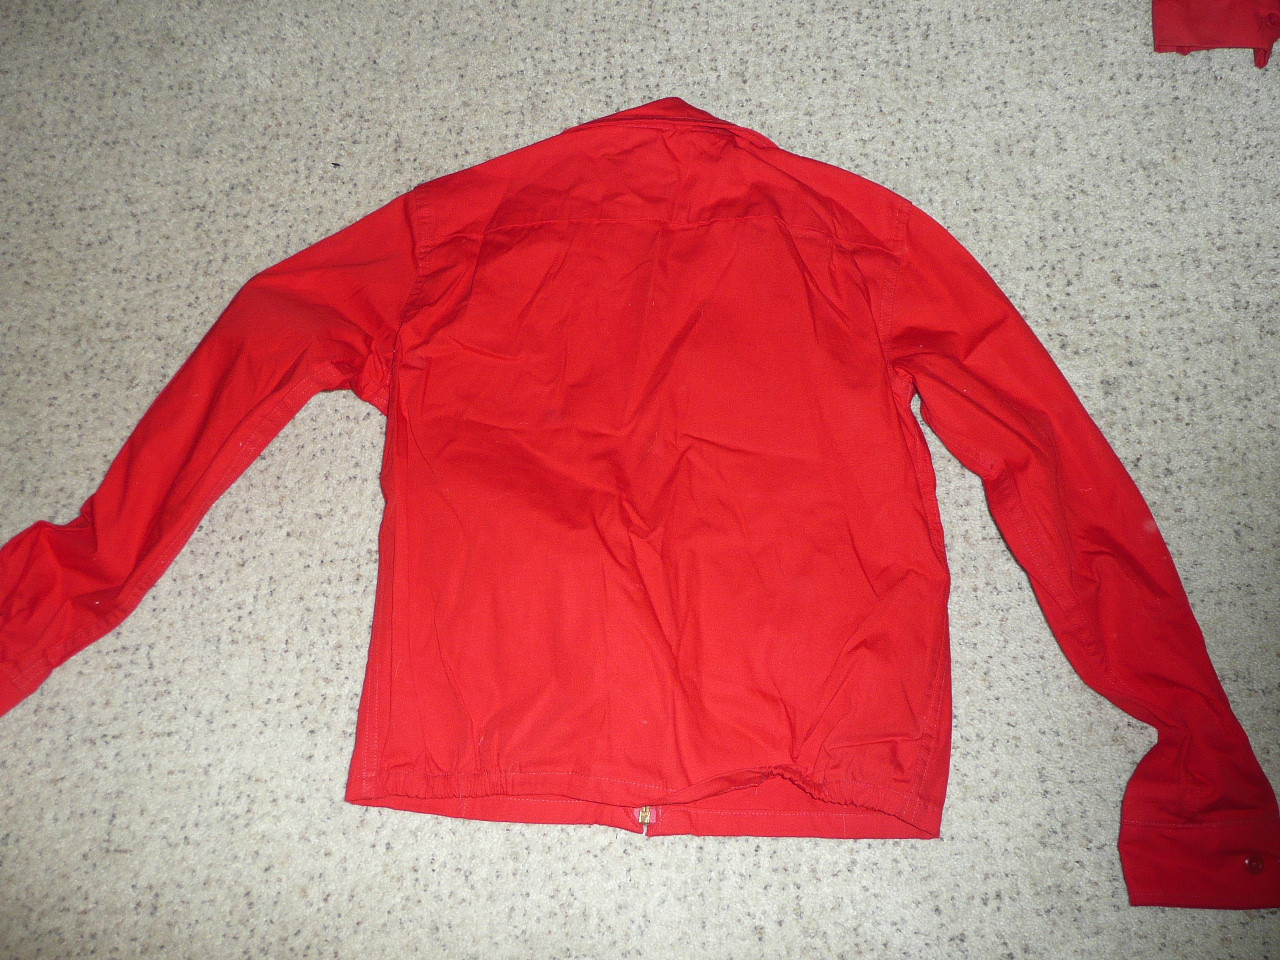 Official Boy Scouts of America Red Cotton Jacket  -  18" chest 22" length, used, #FB8